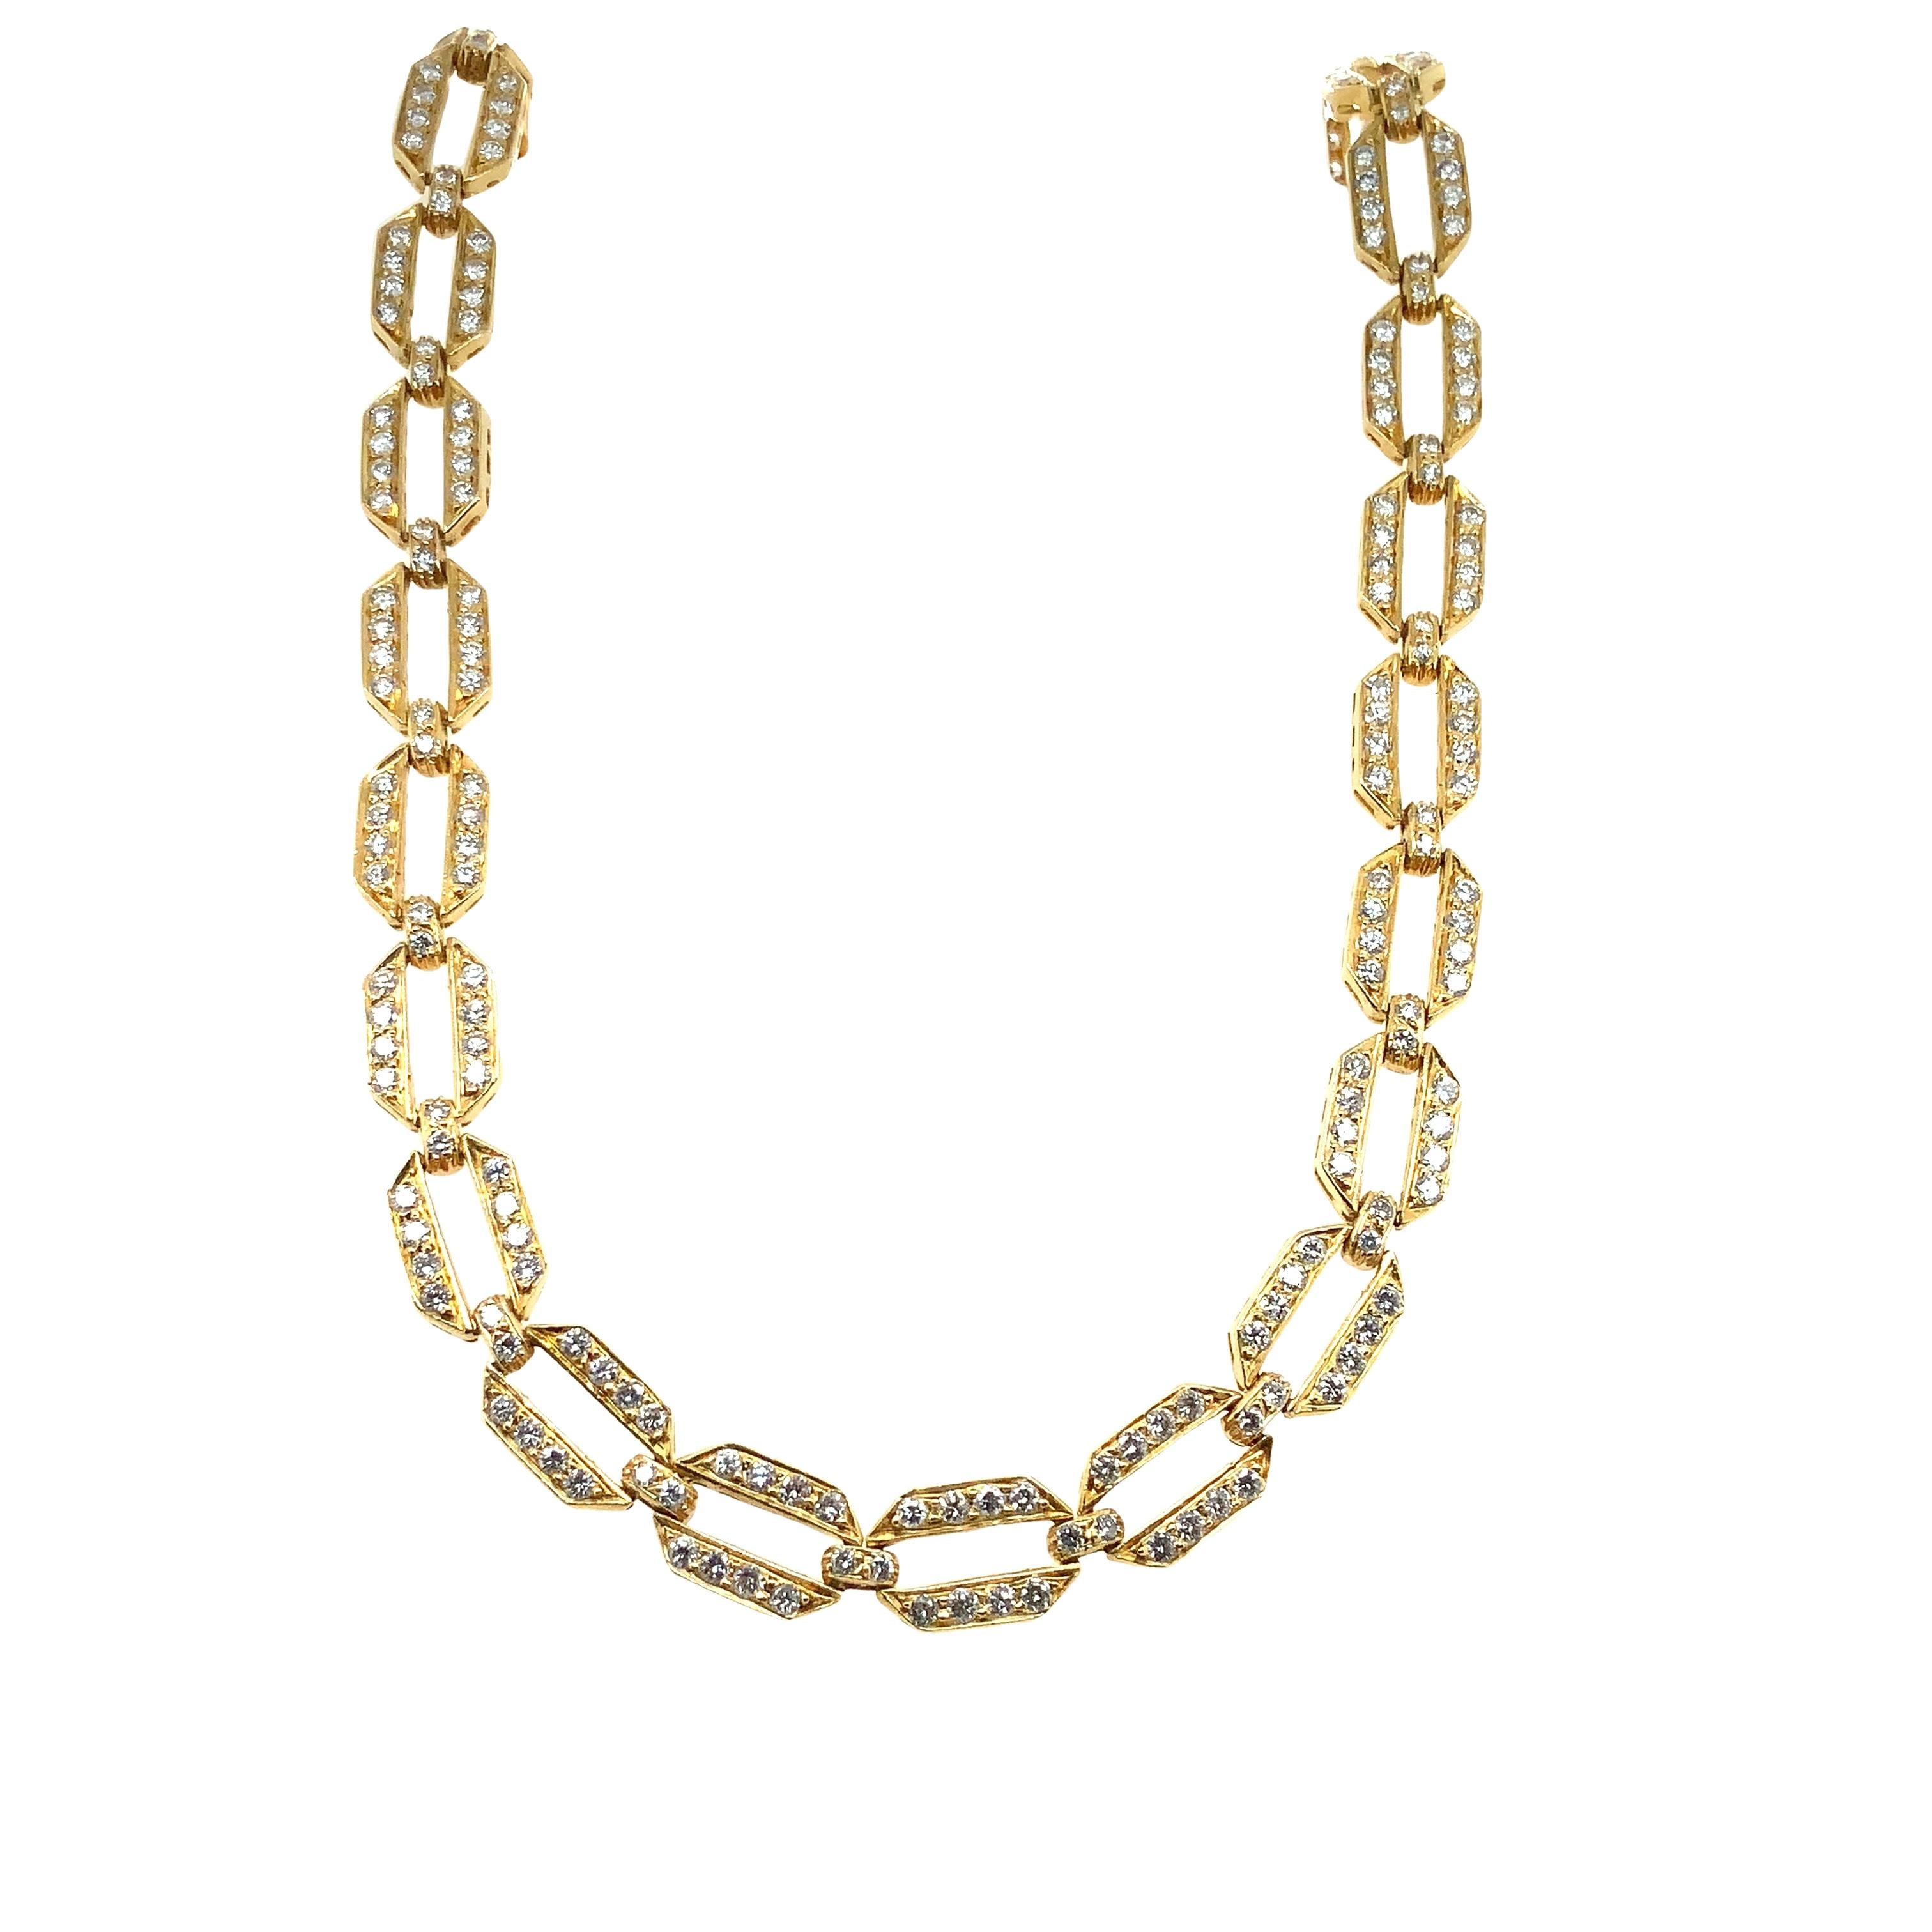 Important One of a Kind Vintage Diamond Link Necklace set in 18k Yellow Gold For Sale 1